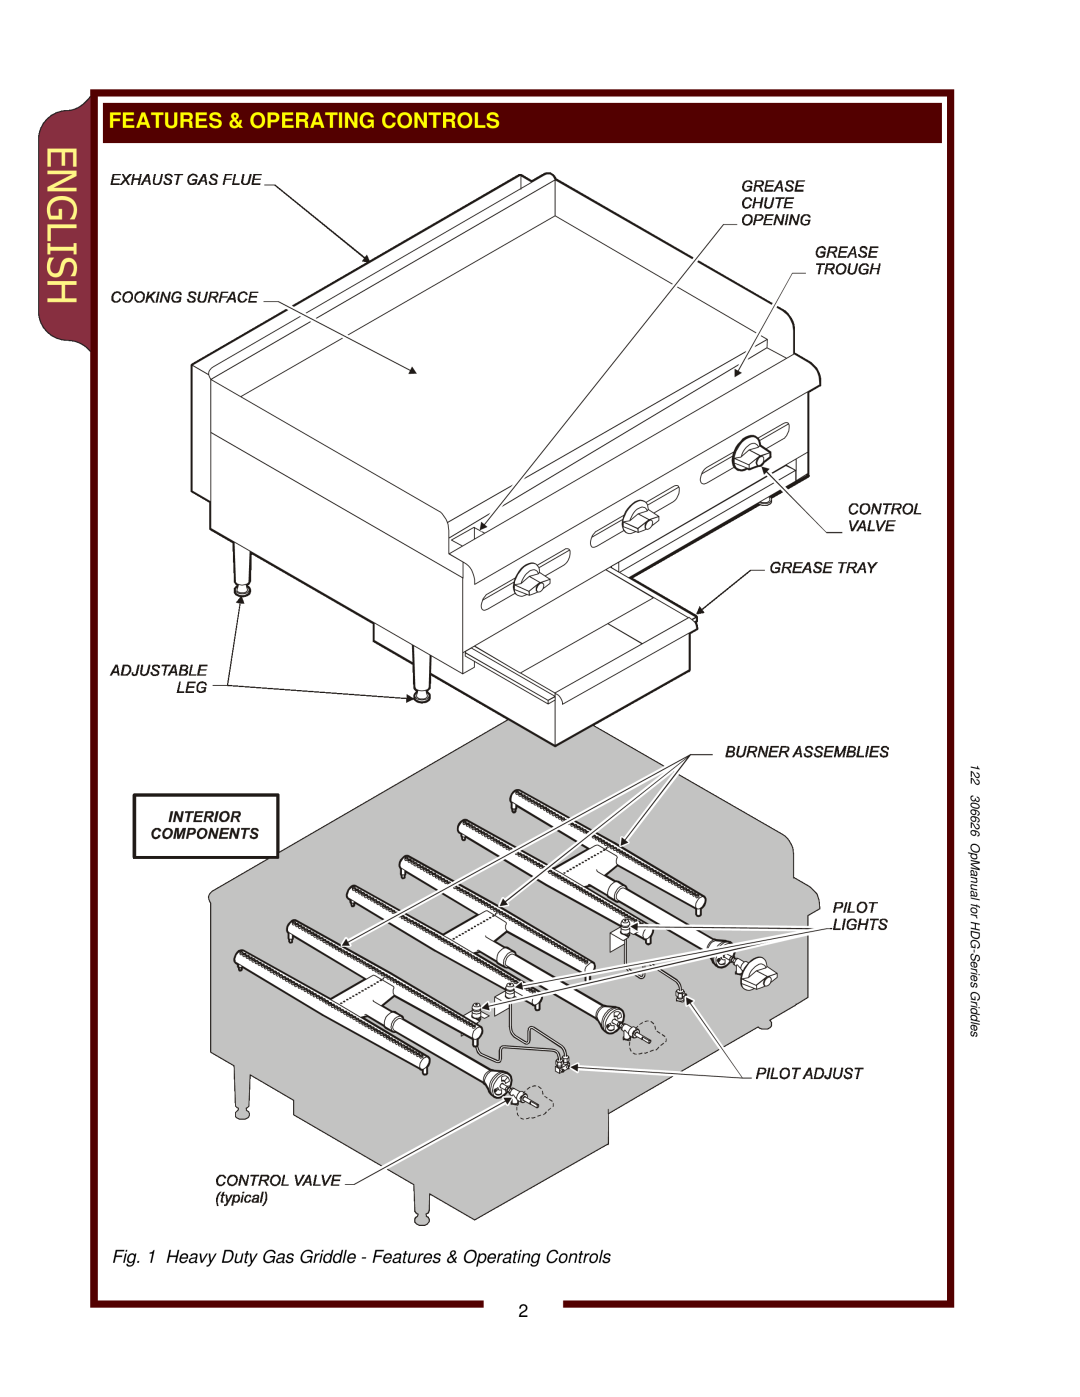 Wells HDG-4830G, HDG-3630G, HDG-2430G operation manual English, 122 306626 OpManual for HDG-SeriesGriddles 